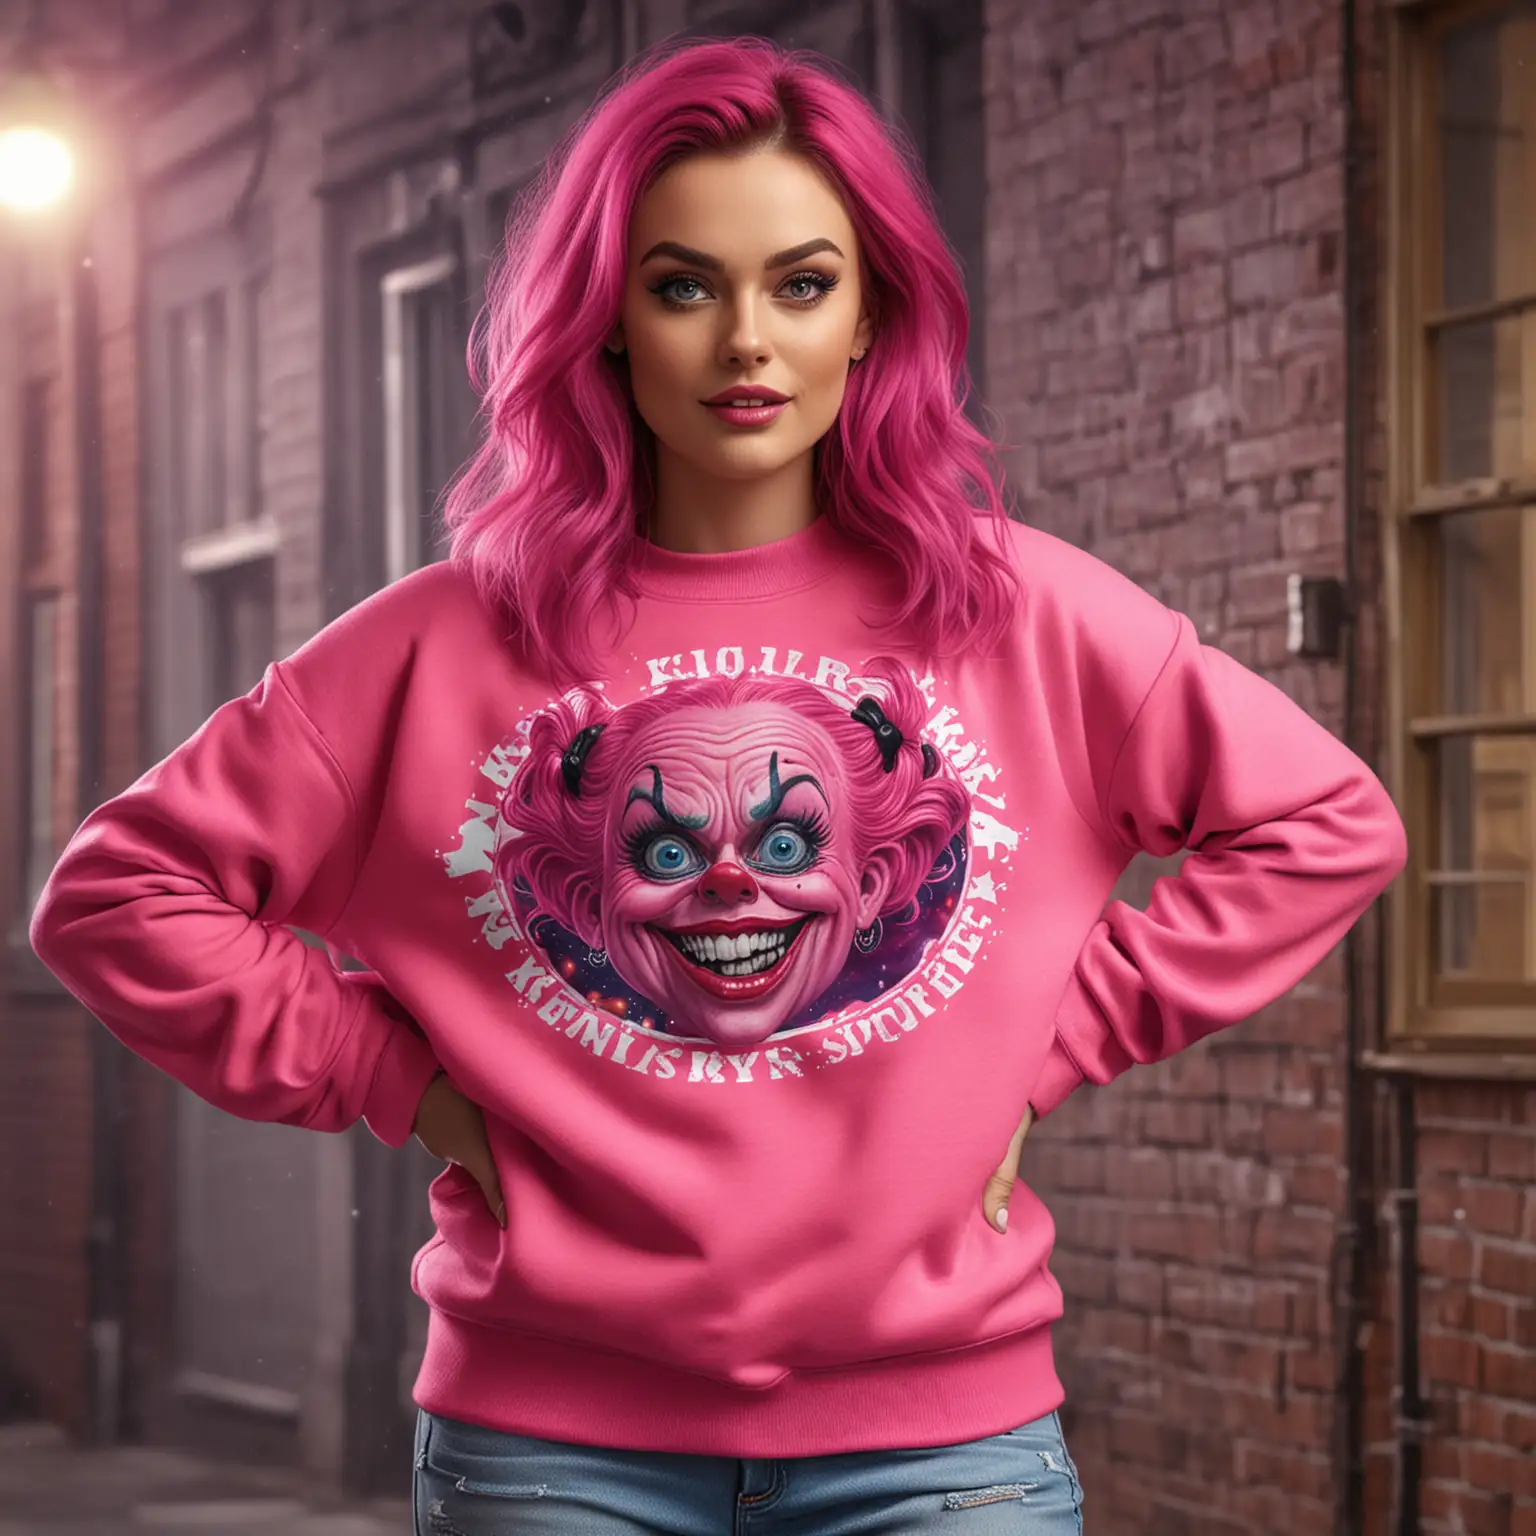 Female Model in Bright Pink Sweatshirt with Killer Klowns from Outer Space Background